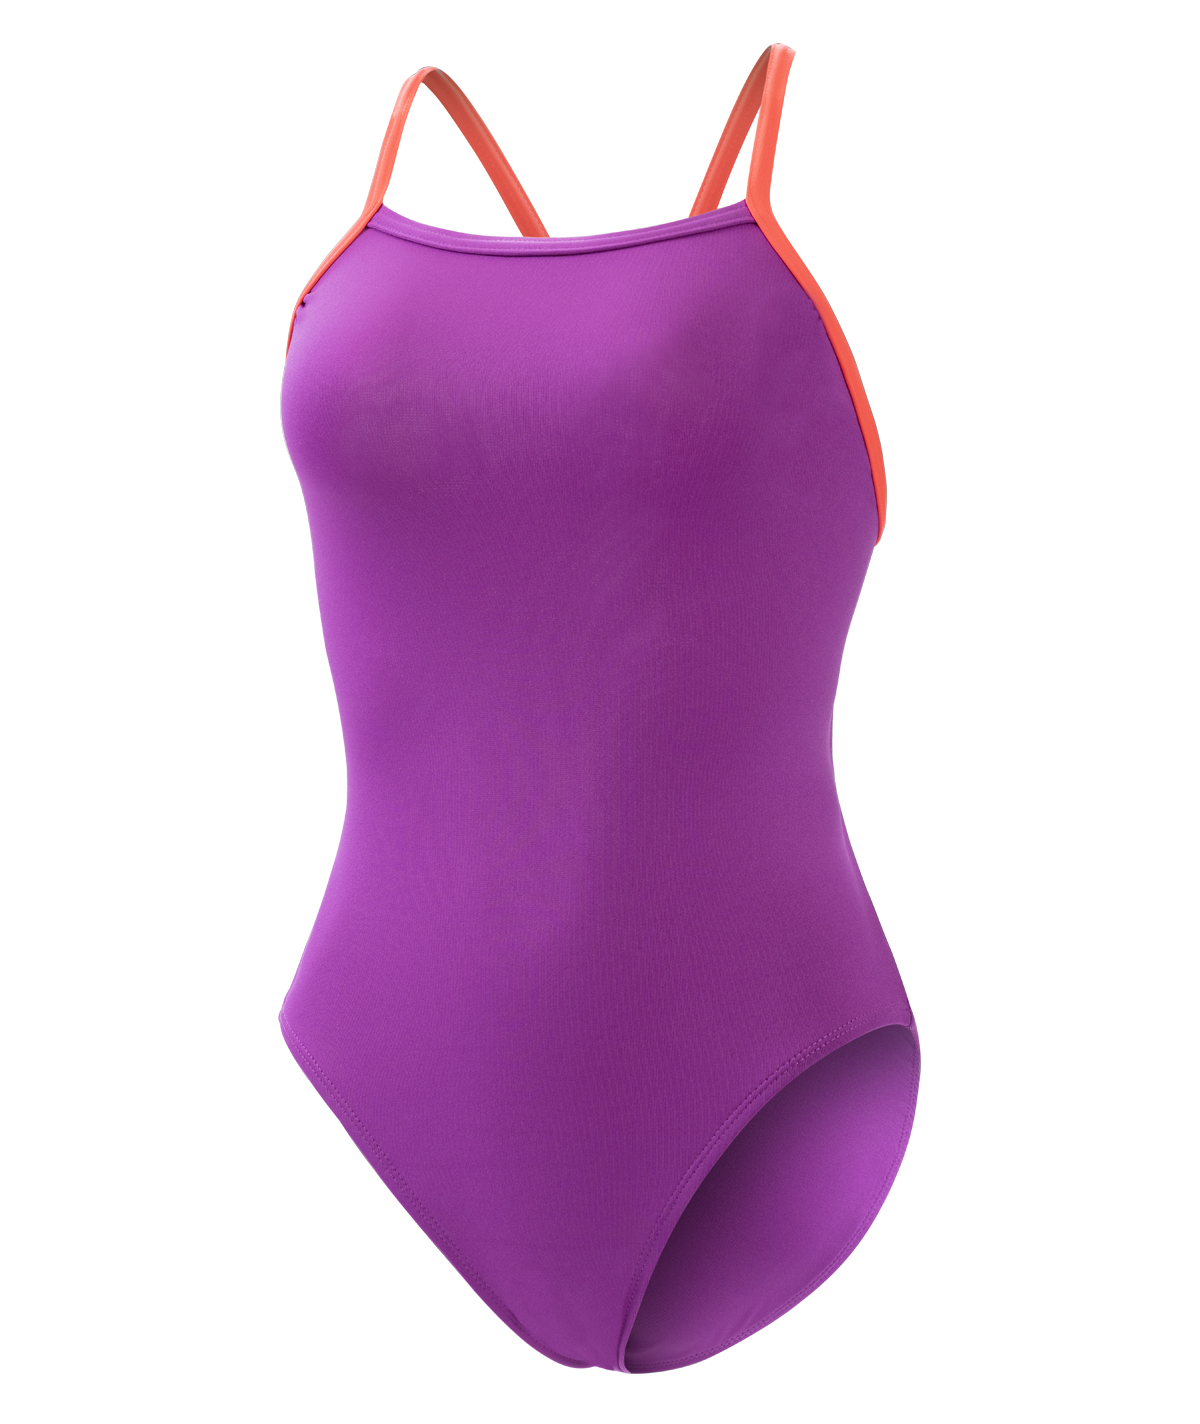 Women's Uglies Solid Purple V-Back One Piece Swimsuit